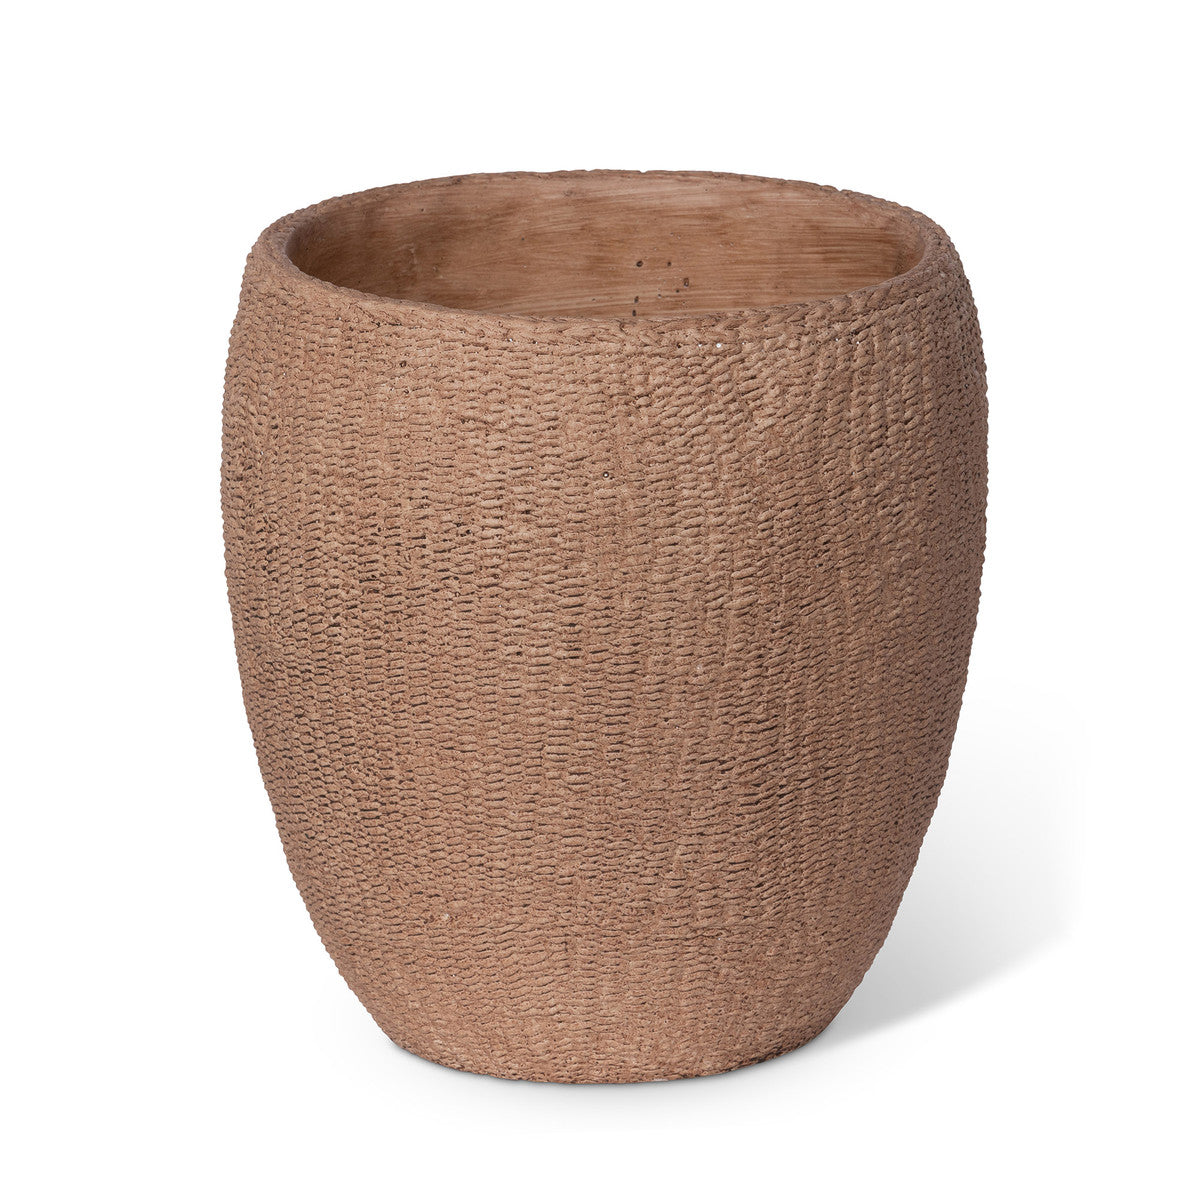 Seagrass Relief Pattern Cement Pot - 10"